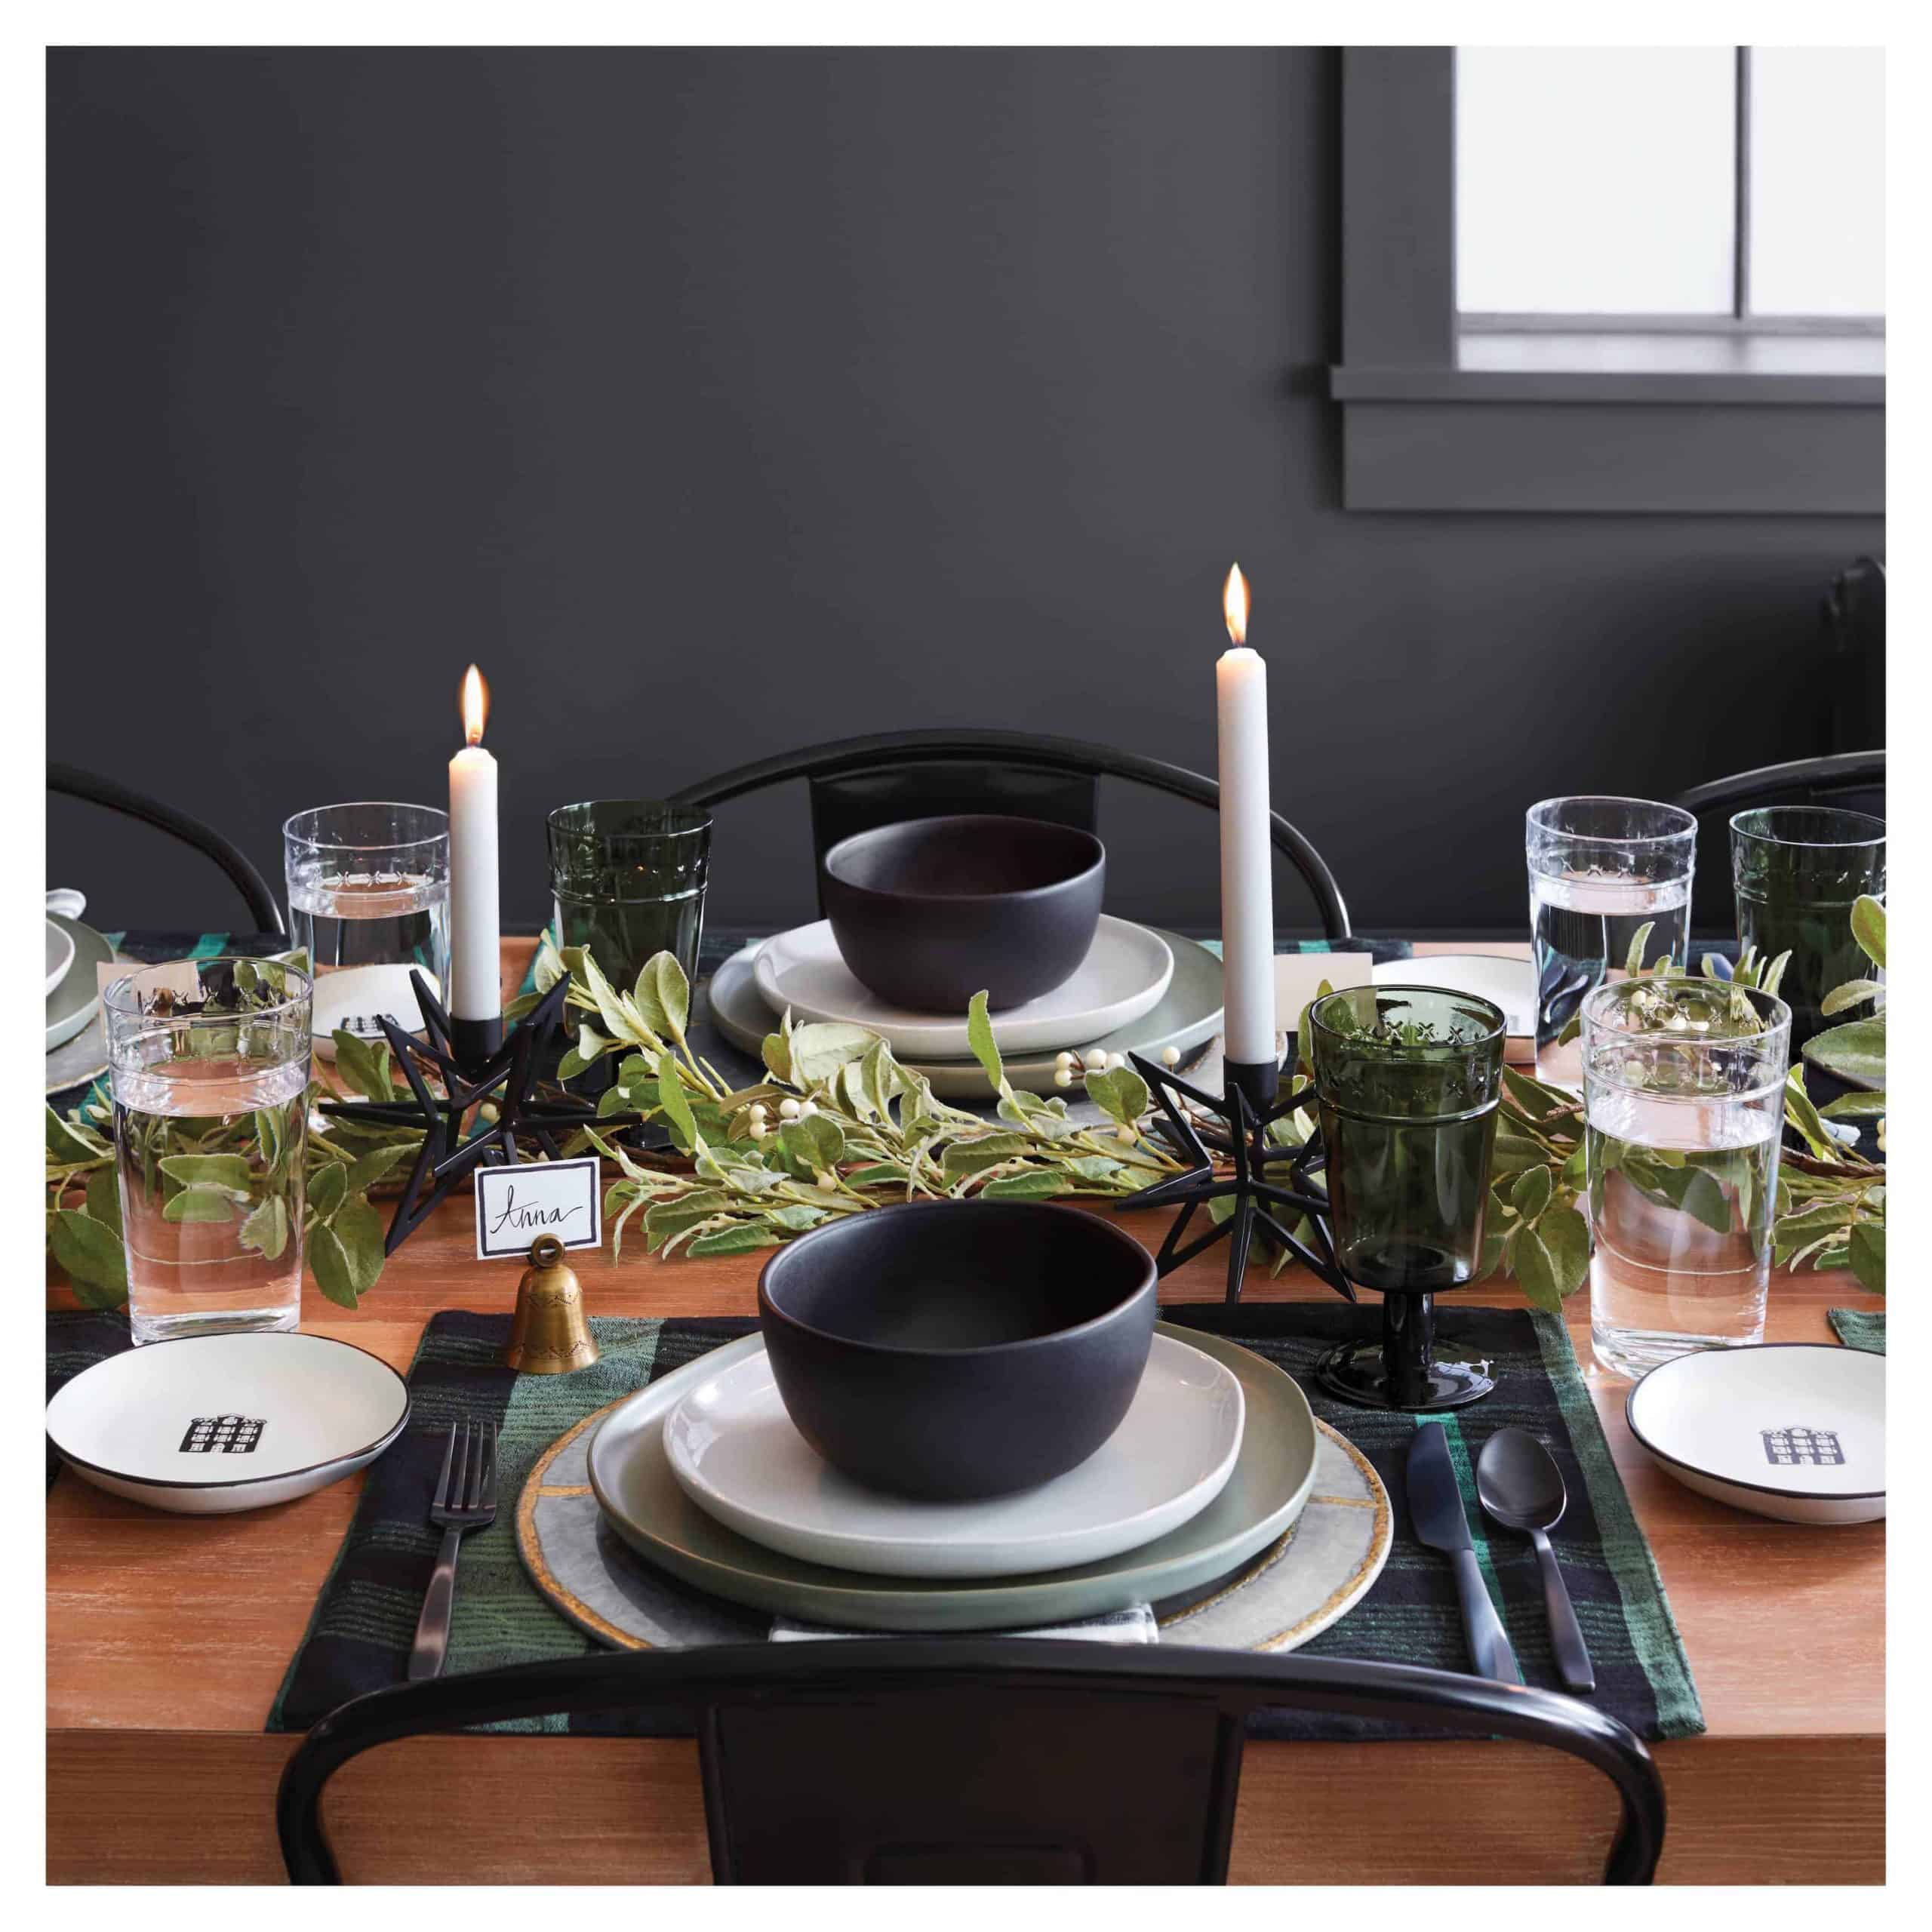 A photo of a table set with a candle and utensils in a black theme.